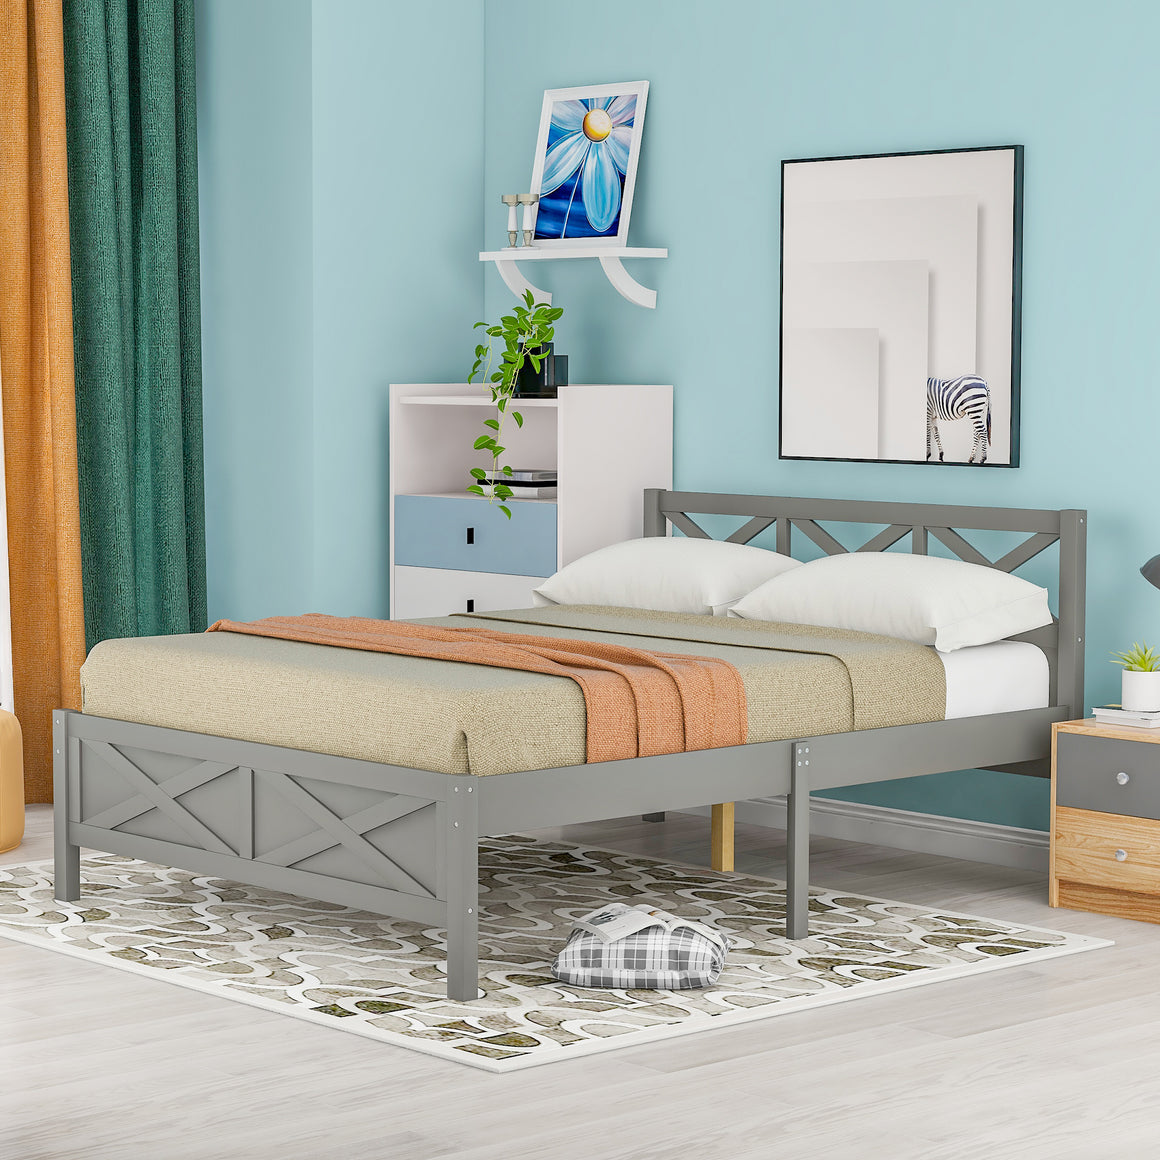 uhomepro Queen Size Platform Bed Frame with Headboard and Footboard, X-shaped Wood Platform Bed for Kids Adults, Queen Bed Frame Mattress Foundation w/ Wood Slats Support, No Box Spring Needed